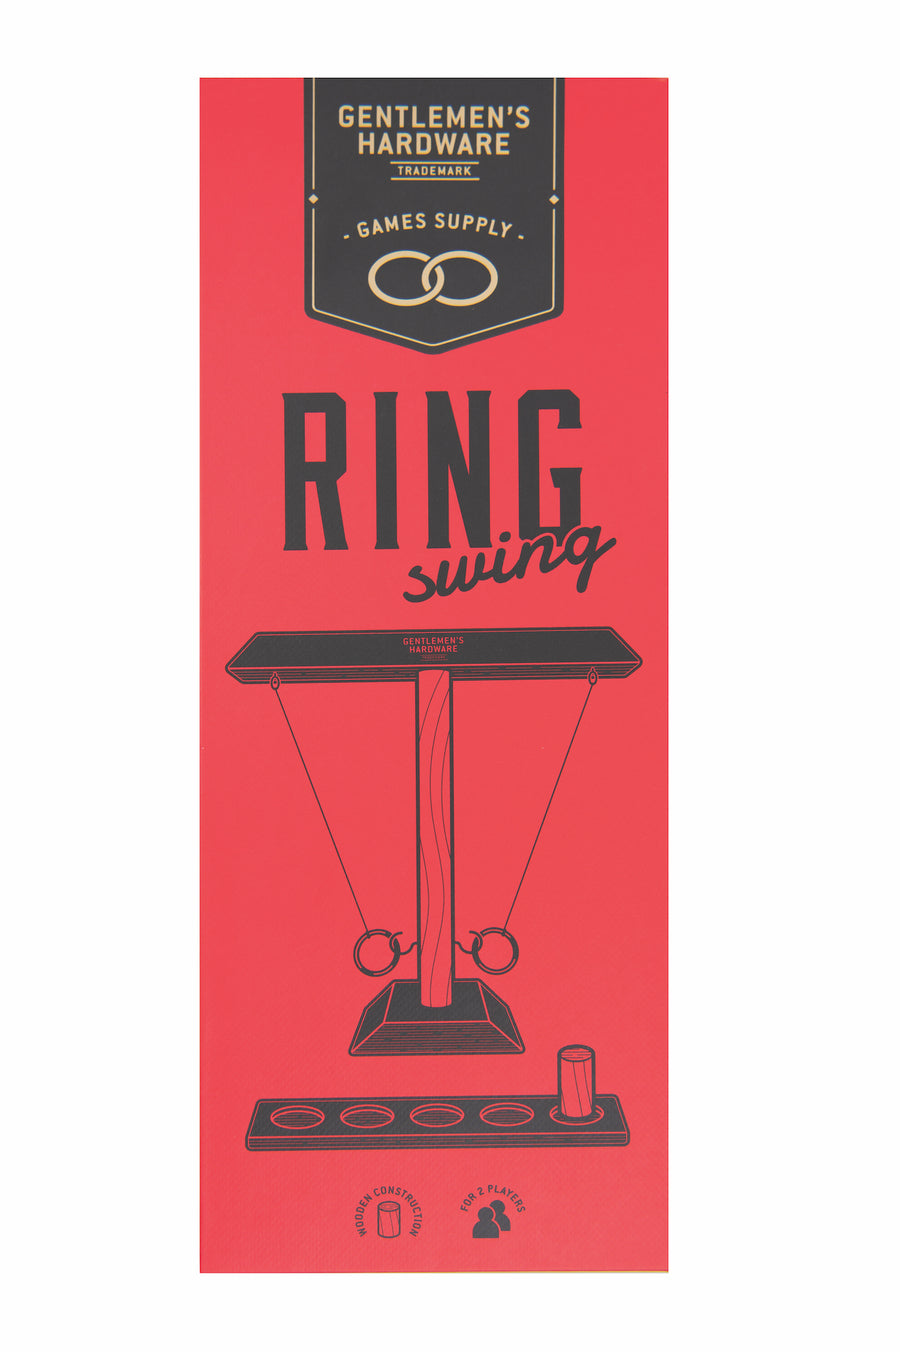 Ring Swing Game box with image of game and the Gentlemen's Hardware logo